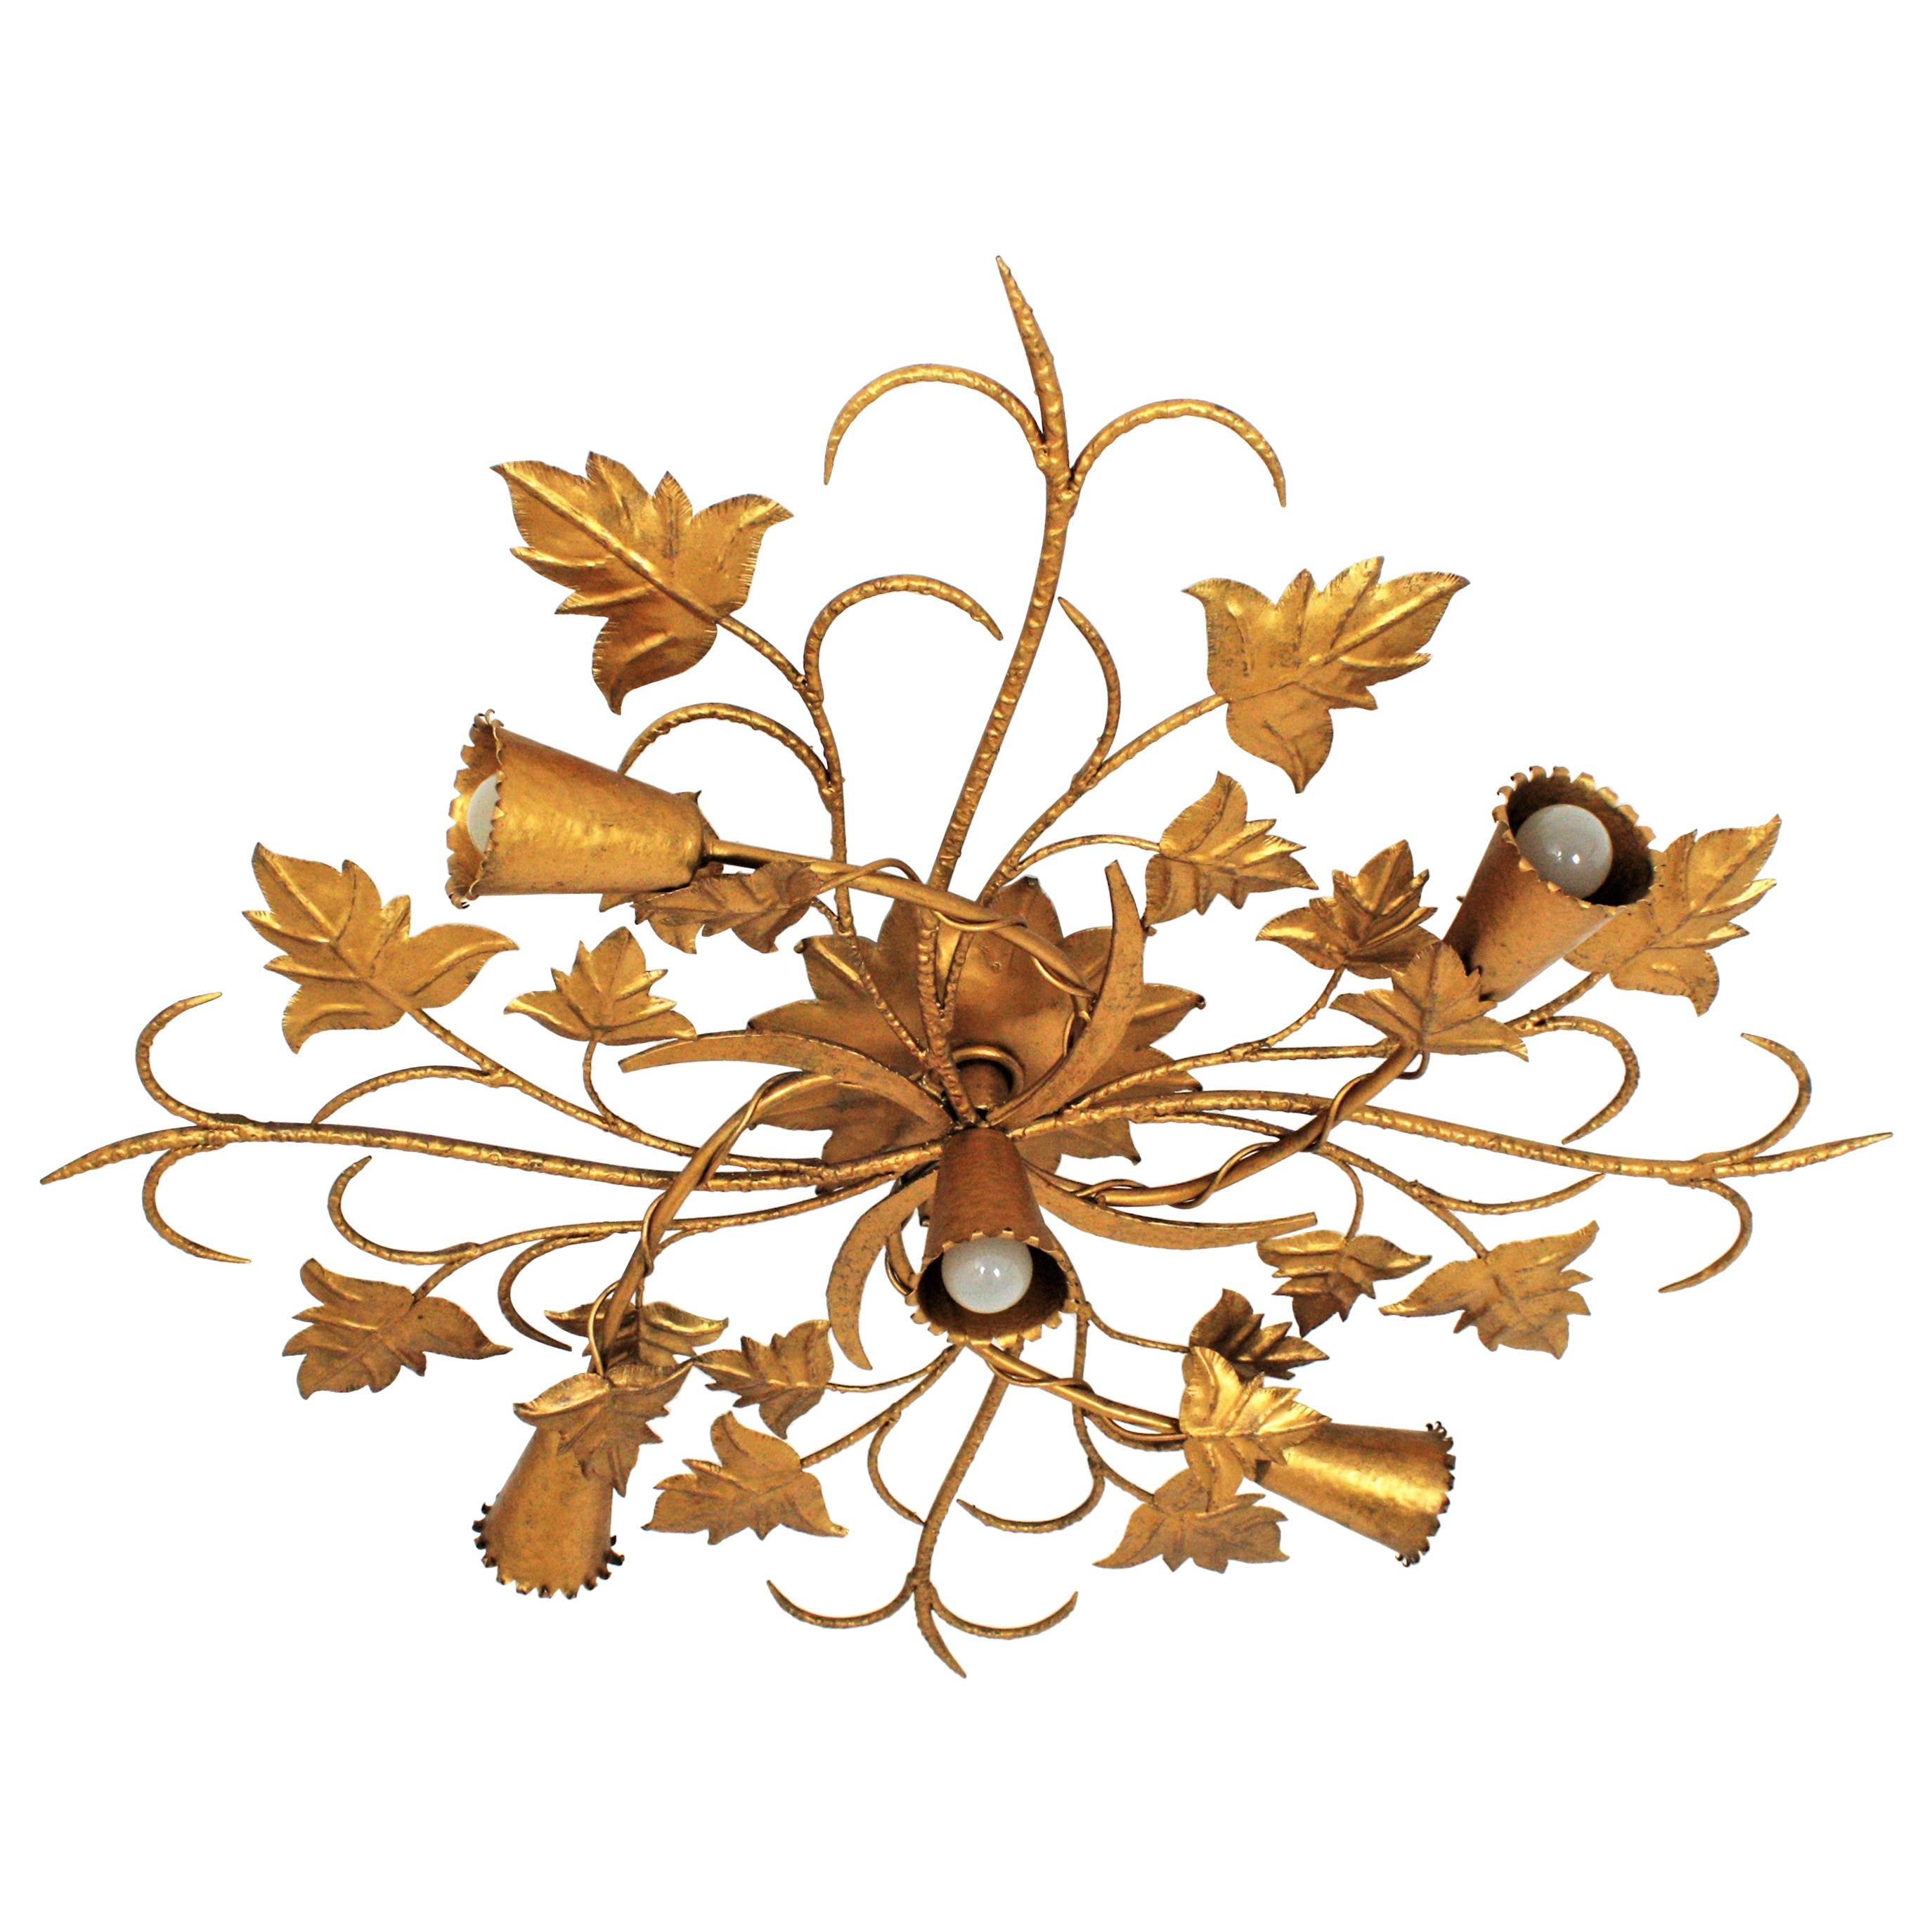 Huge Spanish Foliage Floral Chandelier Flush Mount in Gilt Wrought Iron